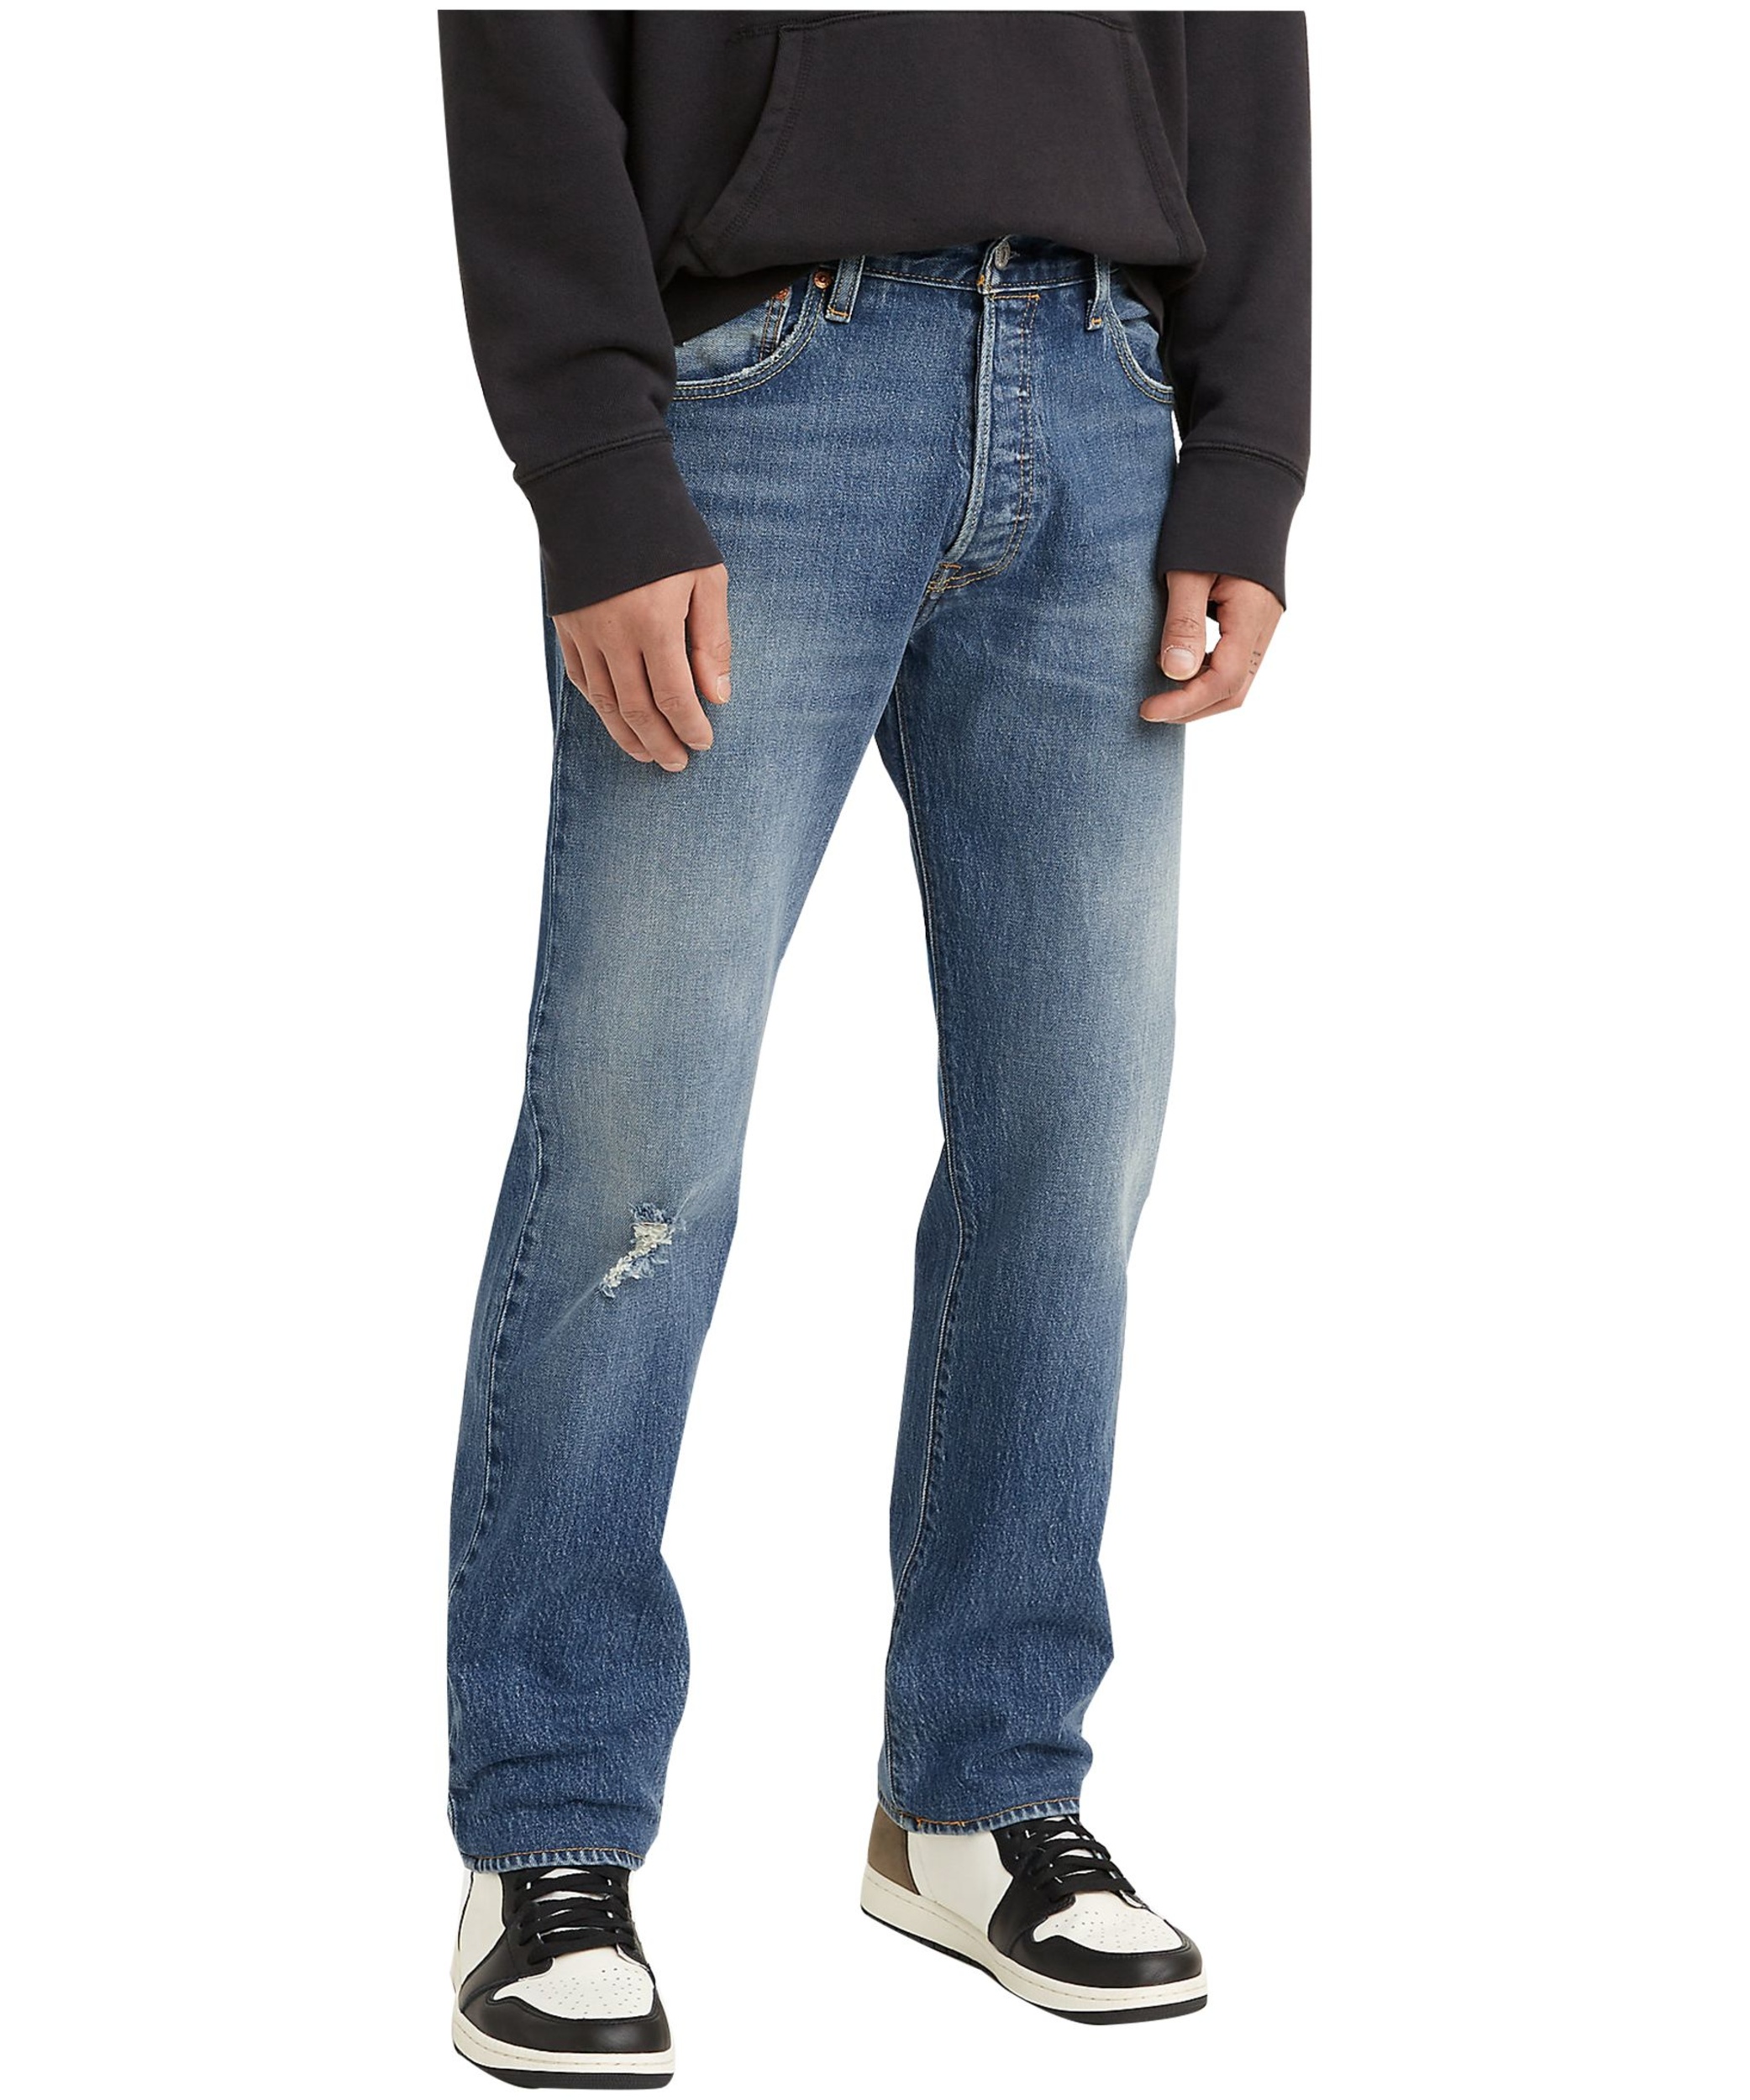 Levi's Men's 501 Mid Rise Straight Fit Button Fly Jeans - Medium Wash ...